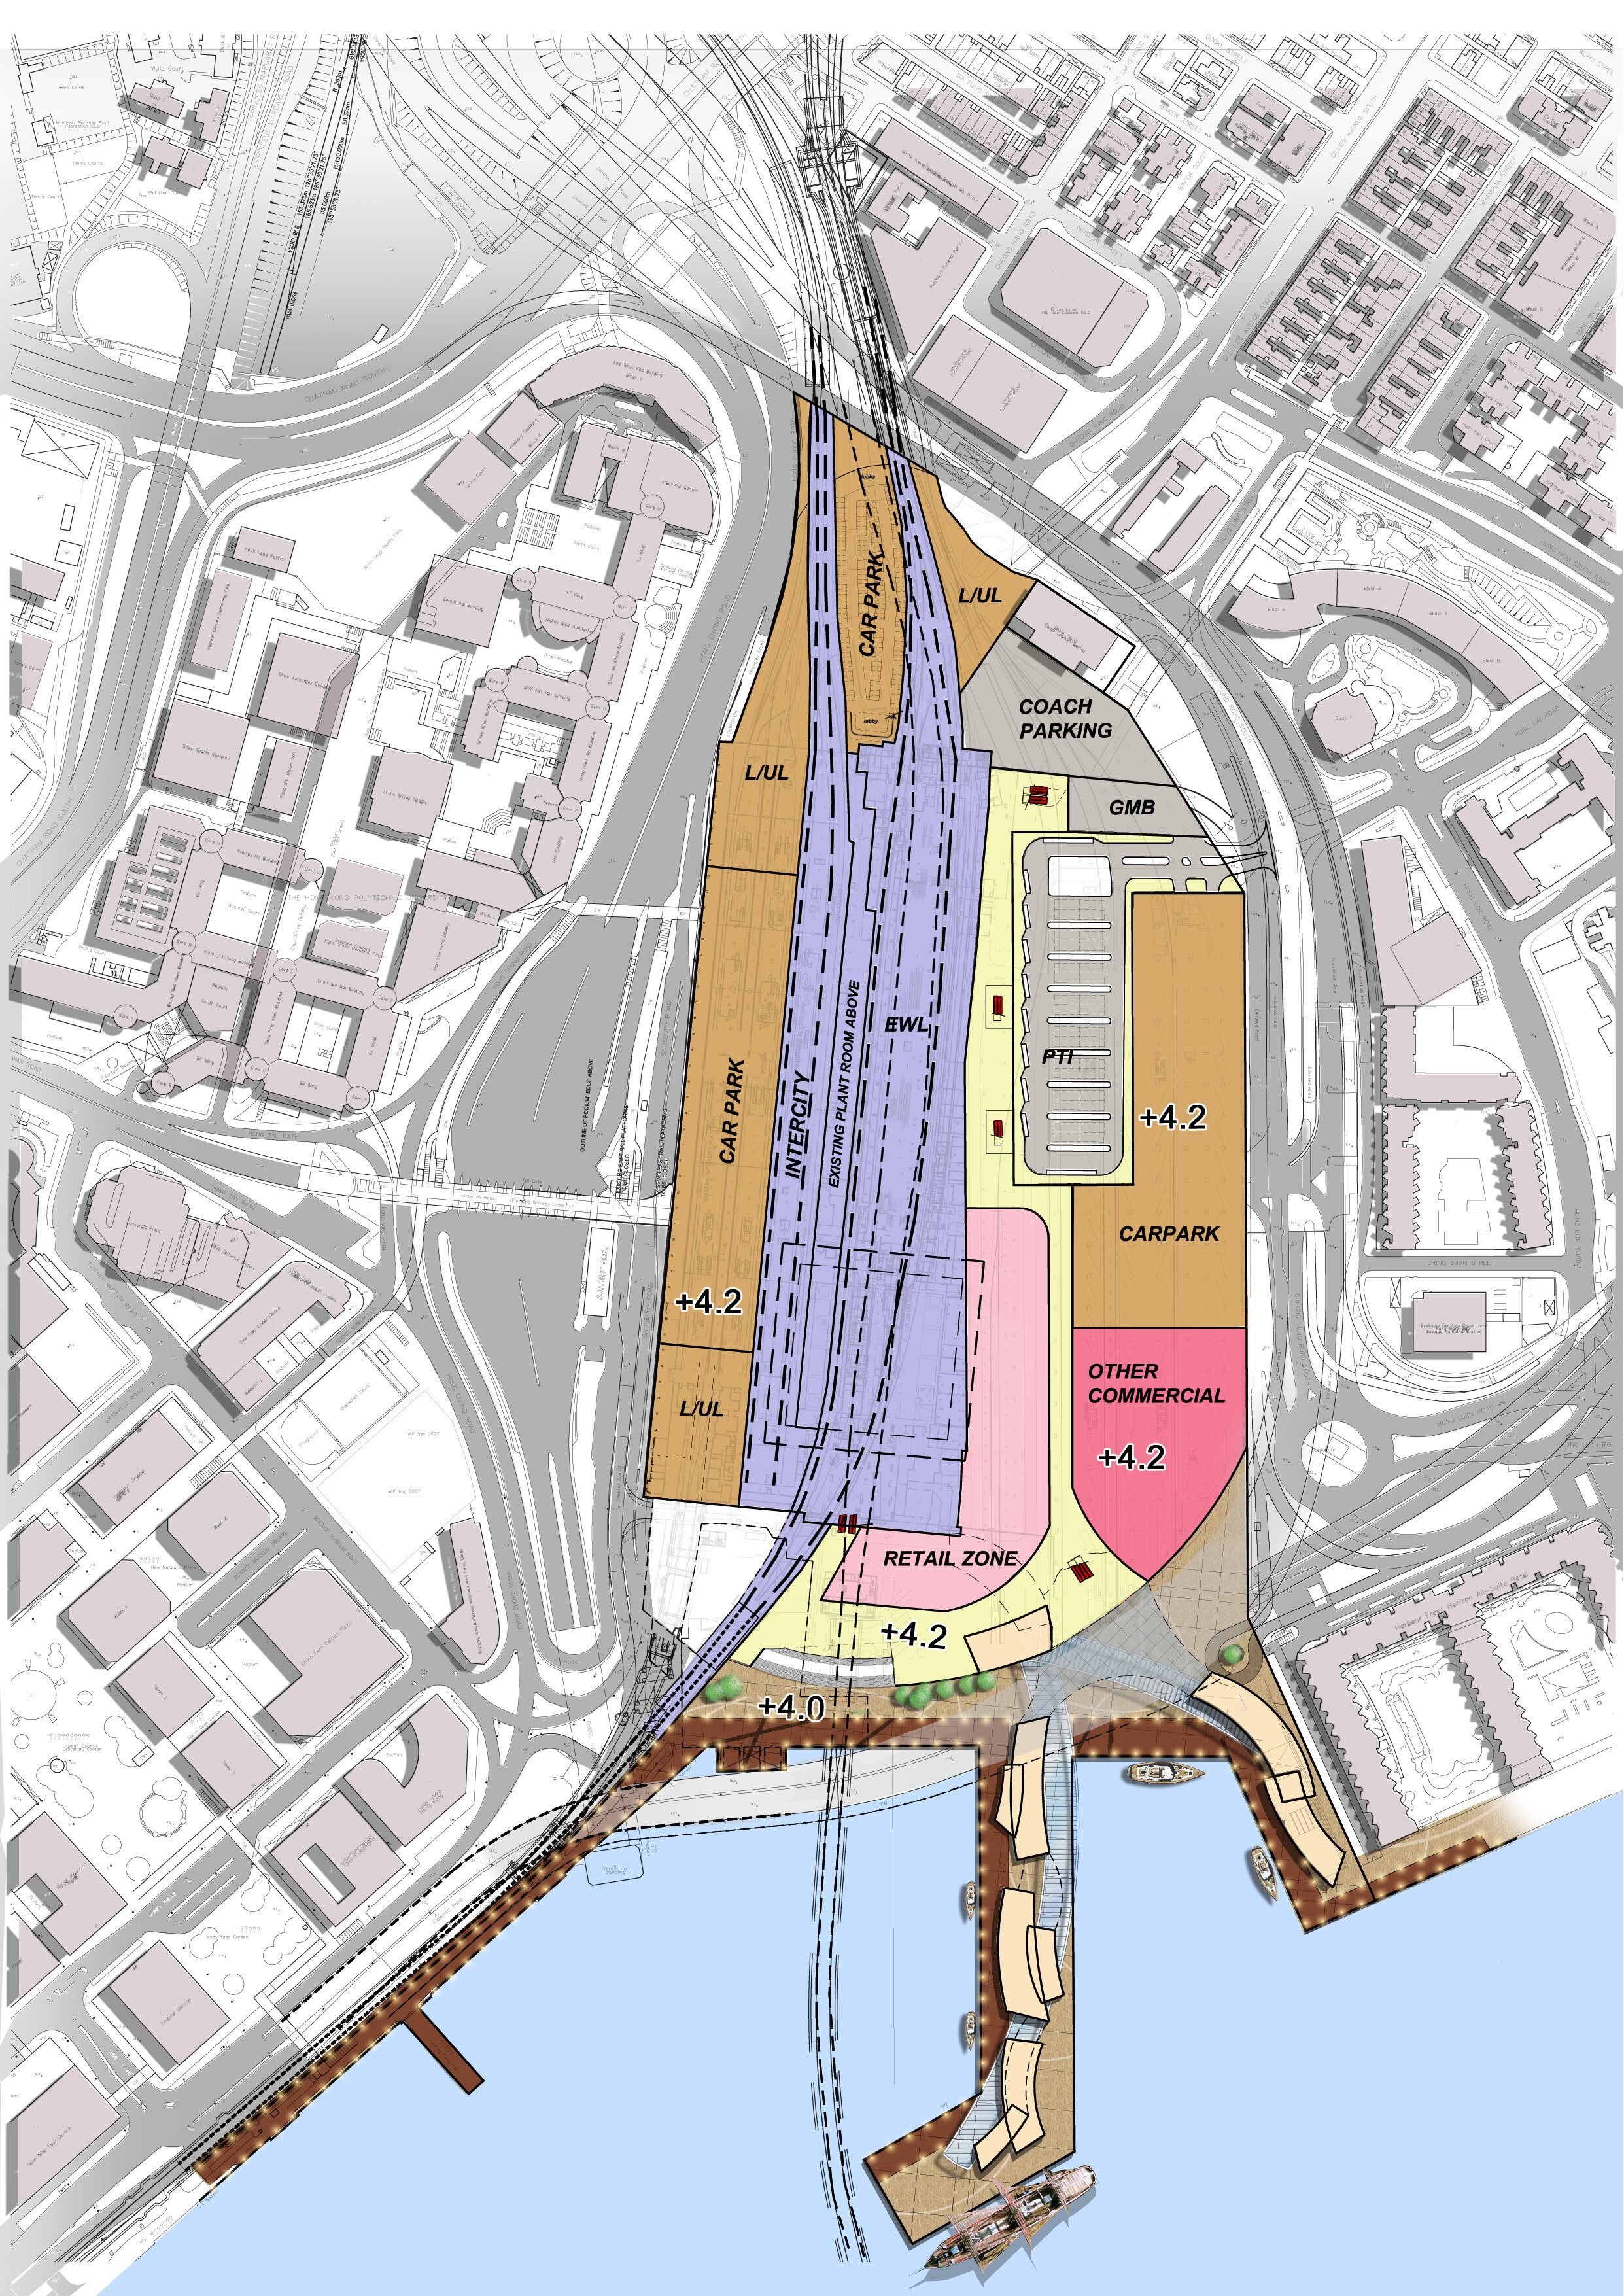 Site plan of the station